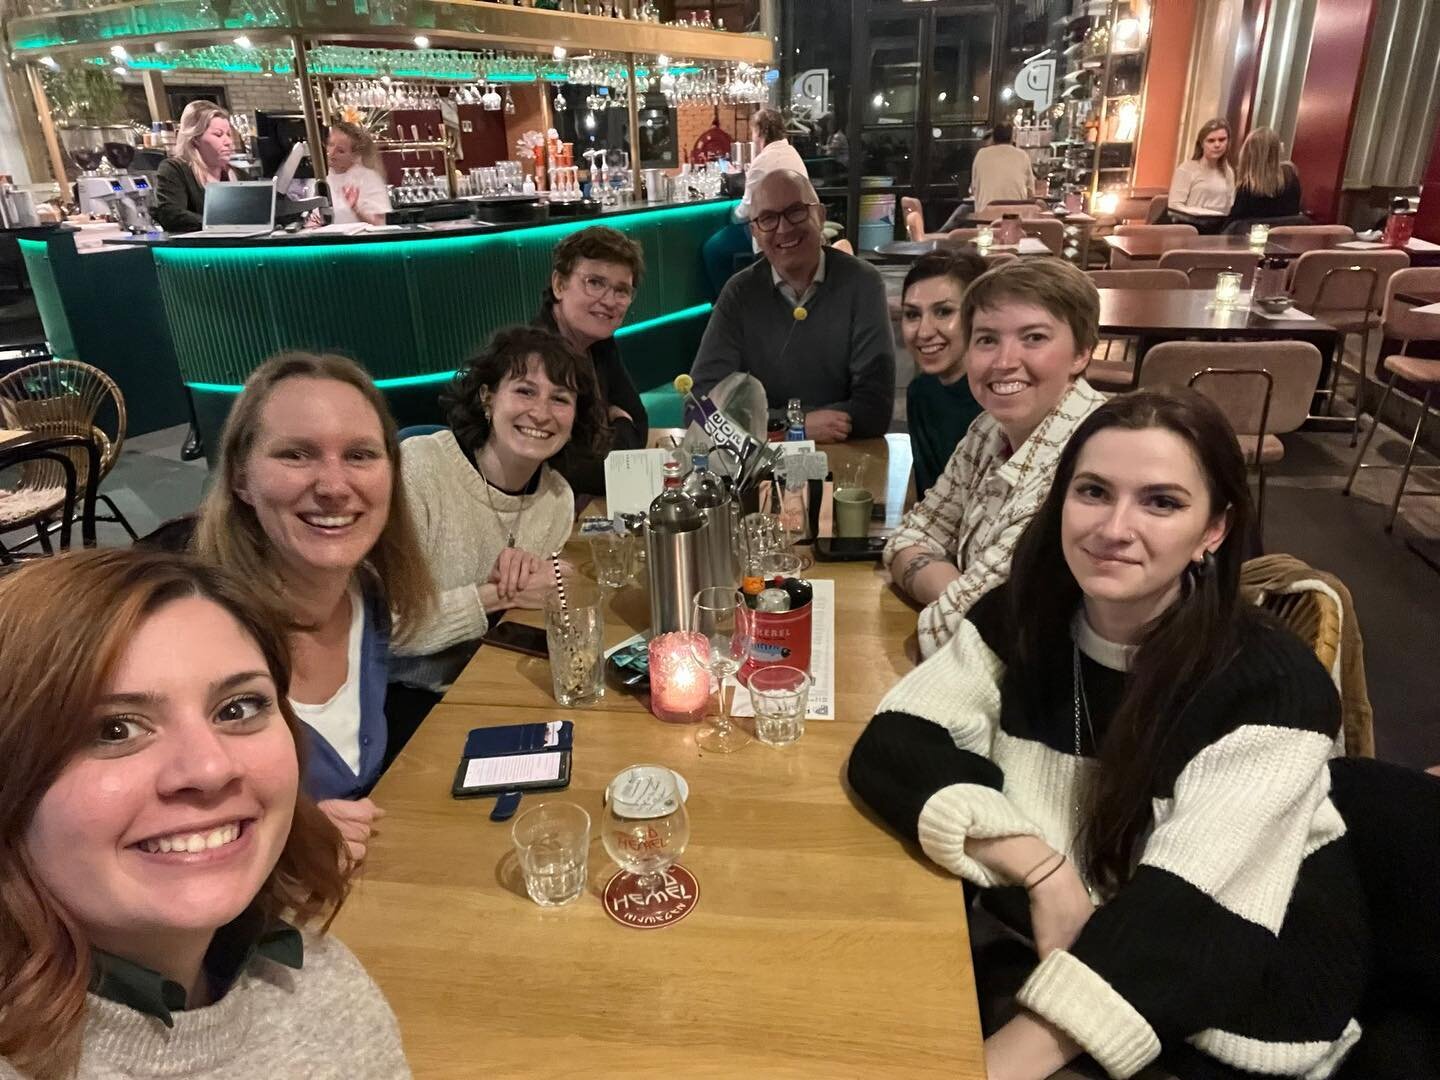 The Ciliarium gave Giulia @ironsgram a proper send off with a lovely dinner and lots of laughs. 96 IPs later she had more than earned it. 🍻
Her departure also marks an important moment: the last of a long line of @scils_eu fellows visiting Nijmegen.